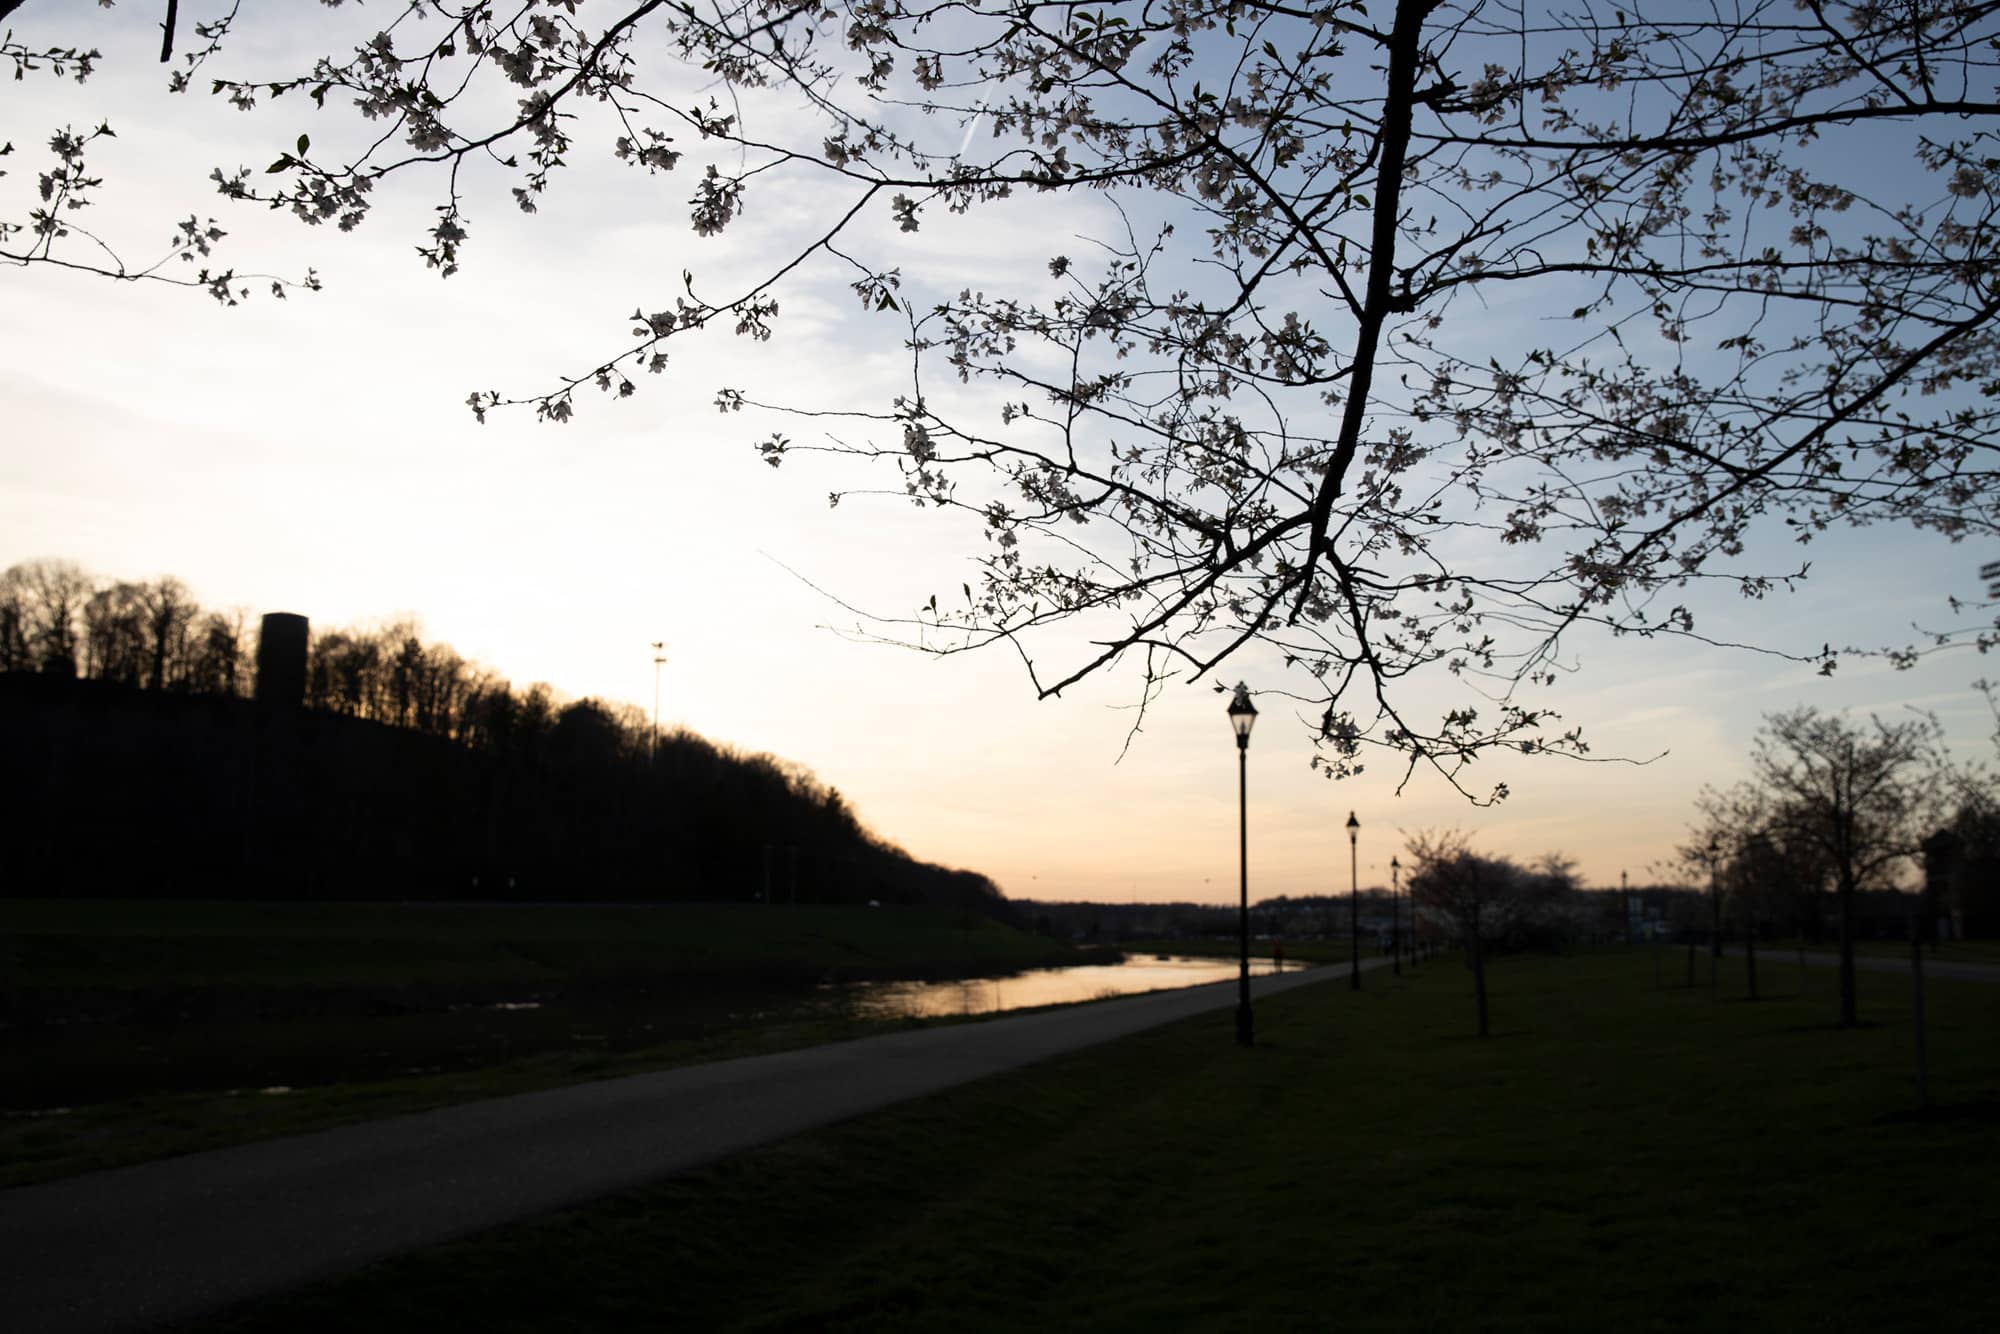 The sun sets on the Hocking River near the cherry blossoms.